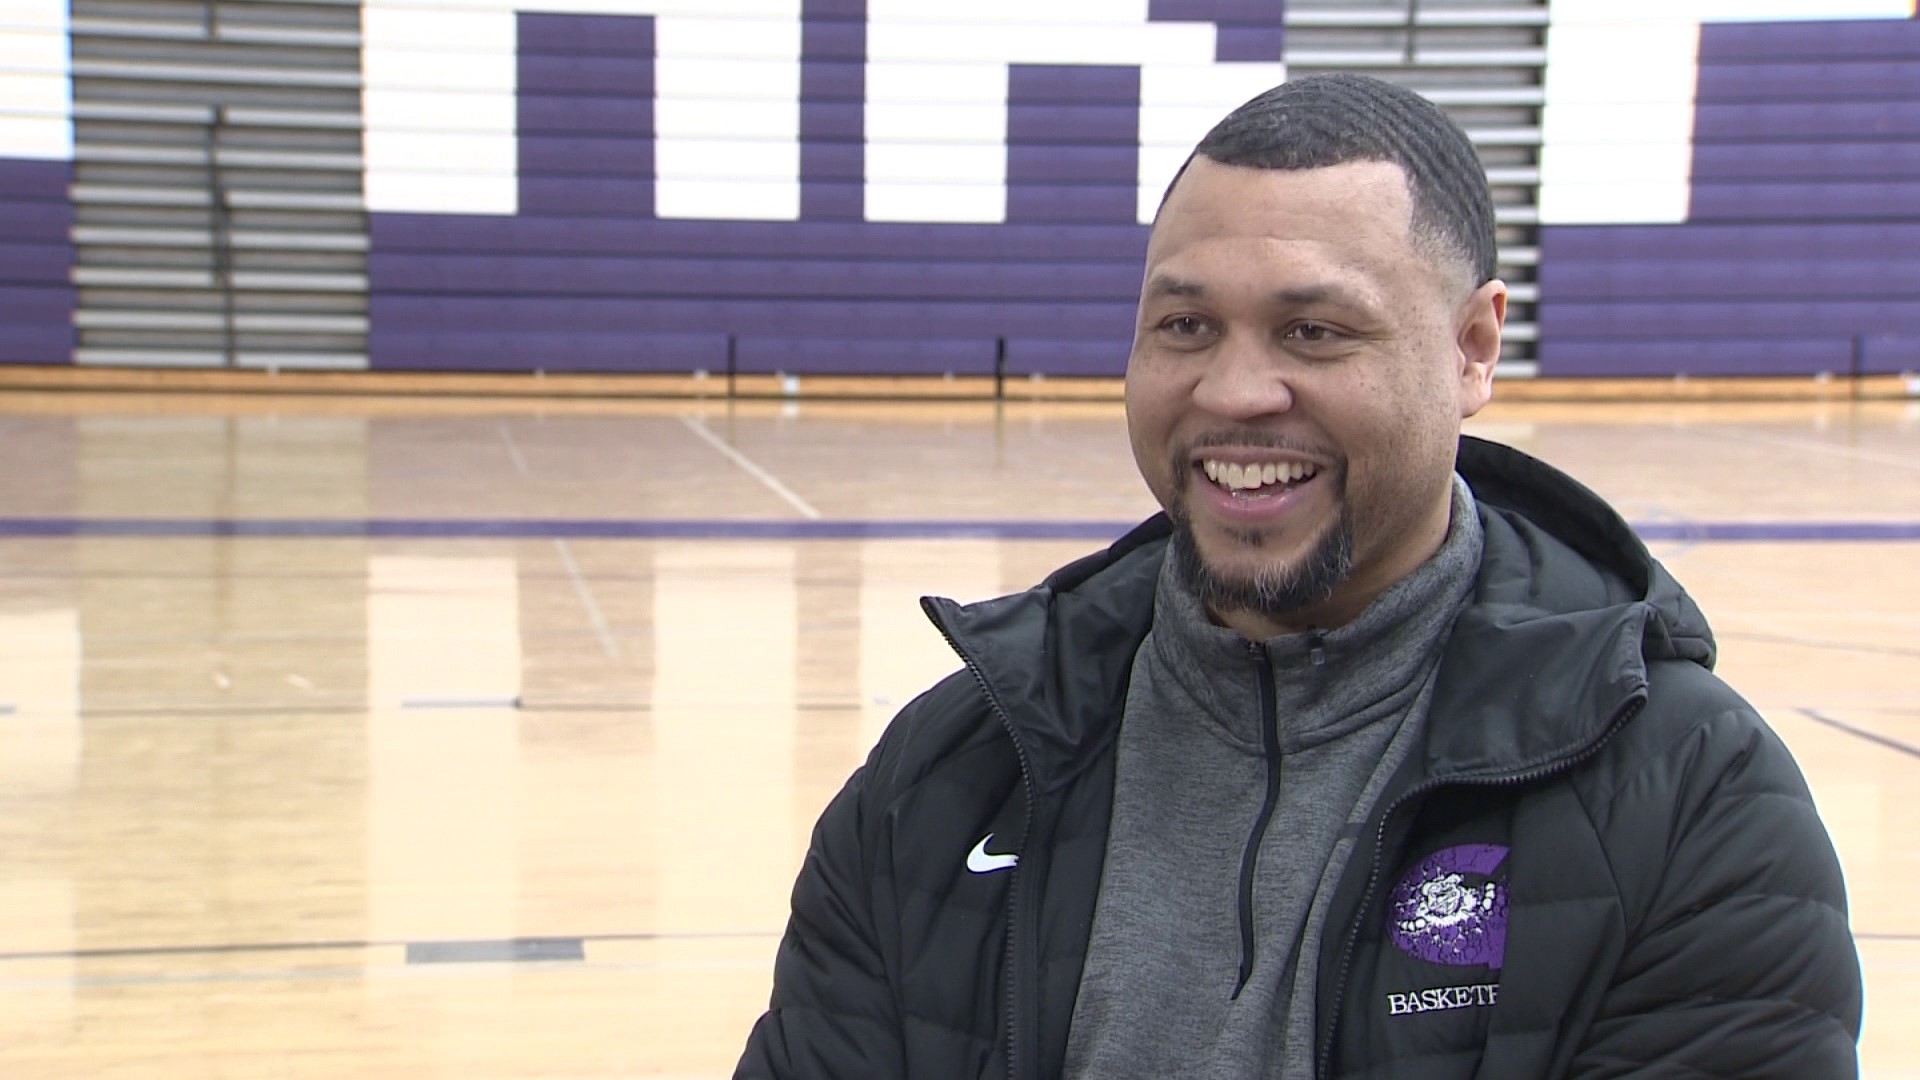 Garfield alumni Brandon Roy is one of the best basketball players to come out of Seattle. When bad knees cut his career short, he returned to the court as a coach.